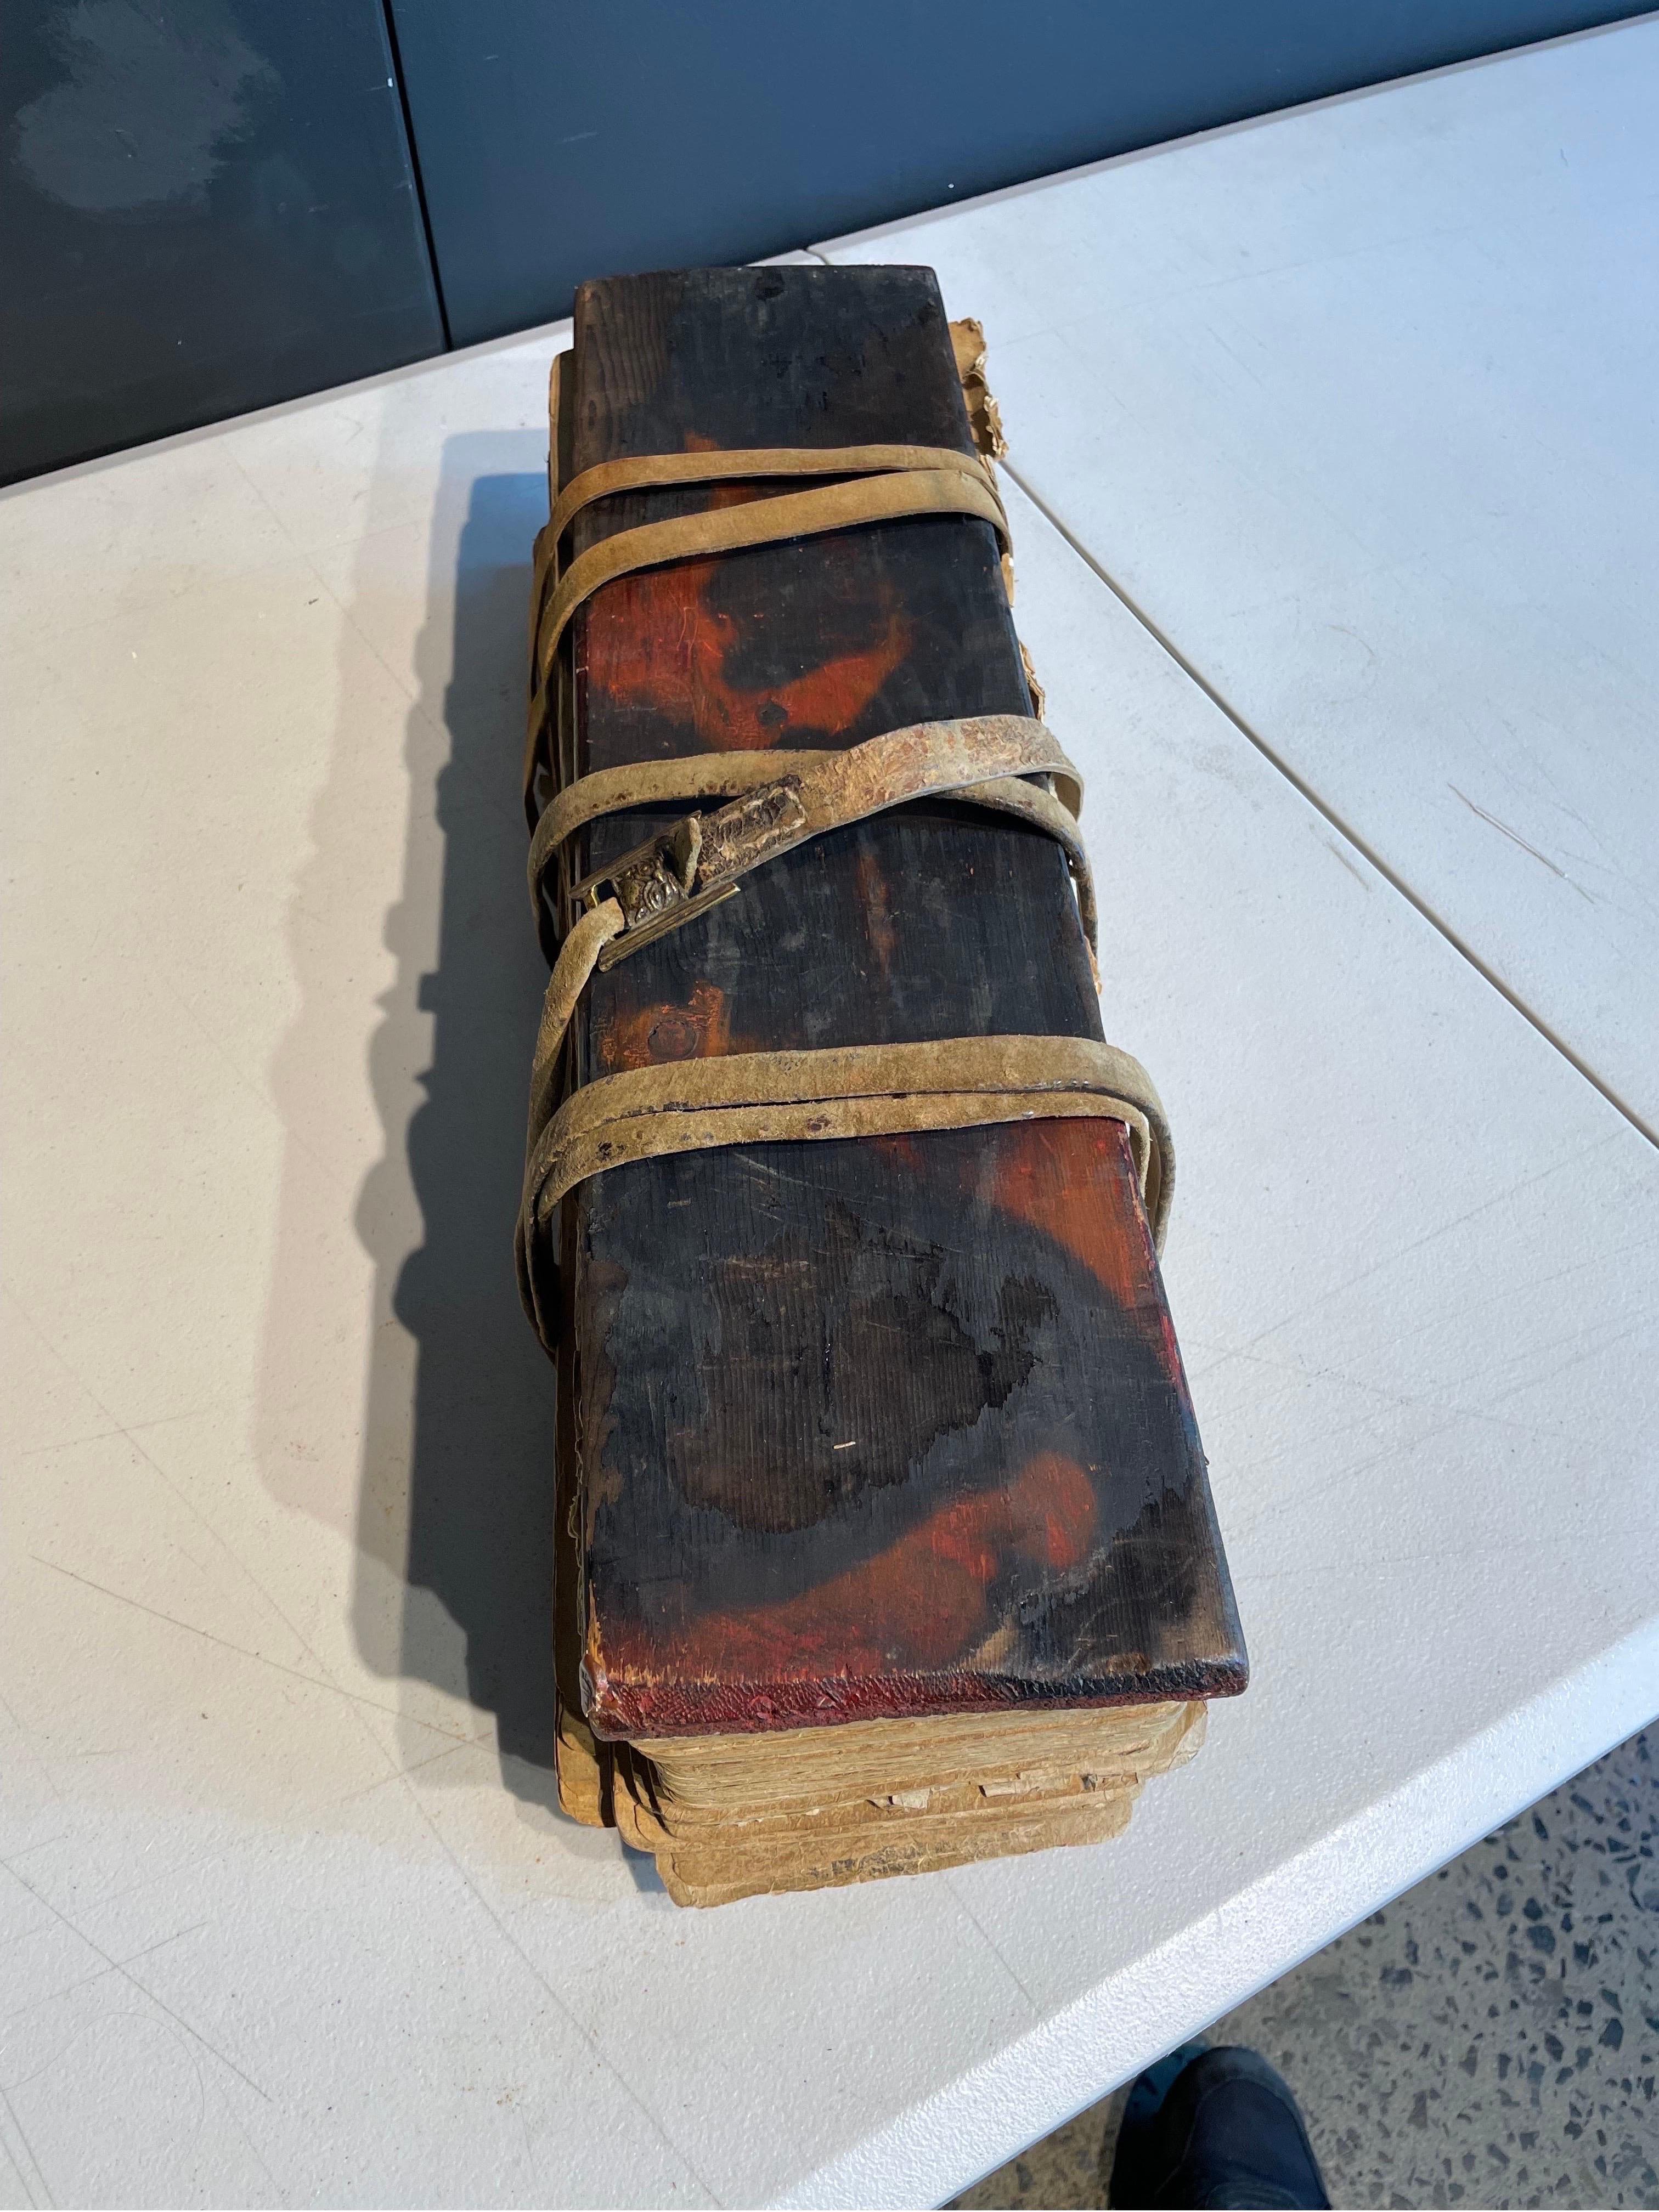 A Tibetan Prayer Book in Wooden Casing, 19th Century

Aged leaves bound with leather strapping between hard covers.

Length: 53.5 cm Width: 13.5 cm Height: 12.5cm

Provenance: Private Melbourne Collection.